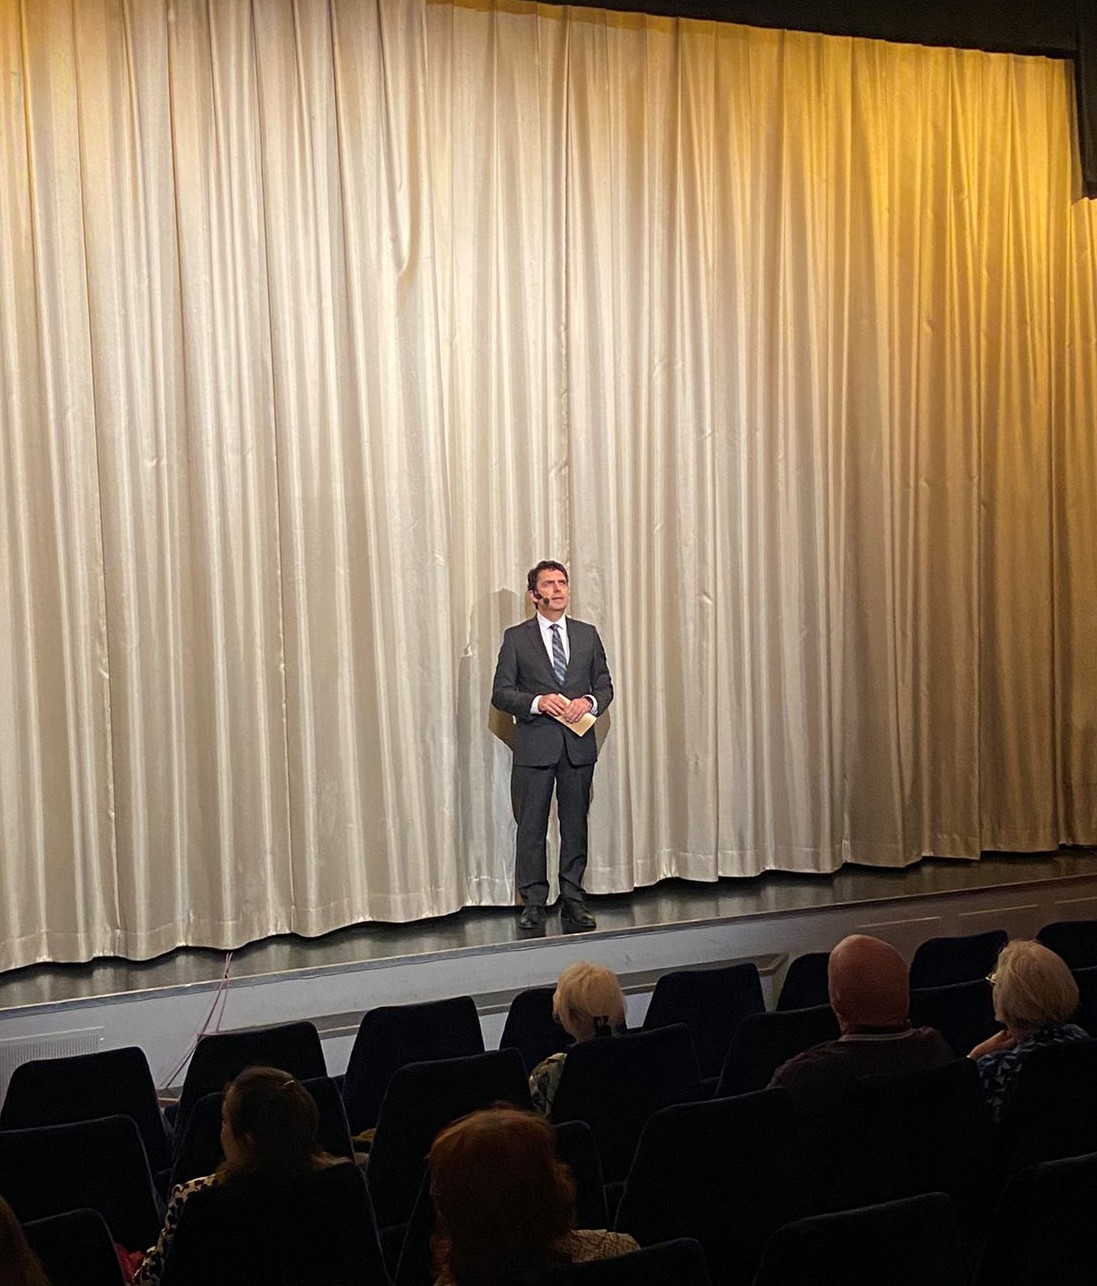 Screening of the Bulgarian-Israeli documentary film "Next Generation" in Stockholm to commemorate the 80th anniversary of the rescue of Bulgarian Jews during the Holocaust